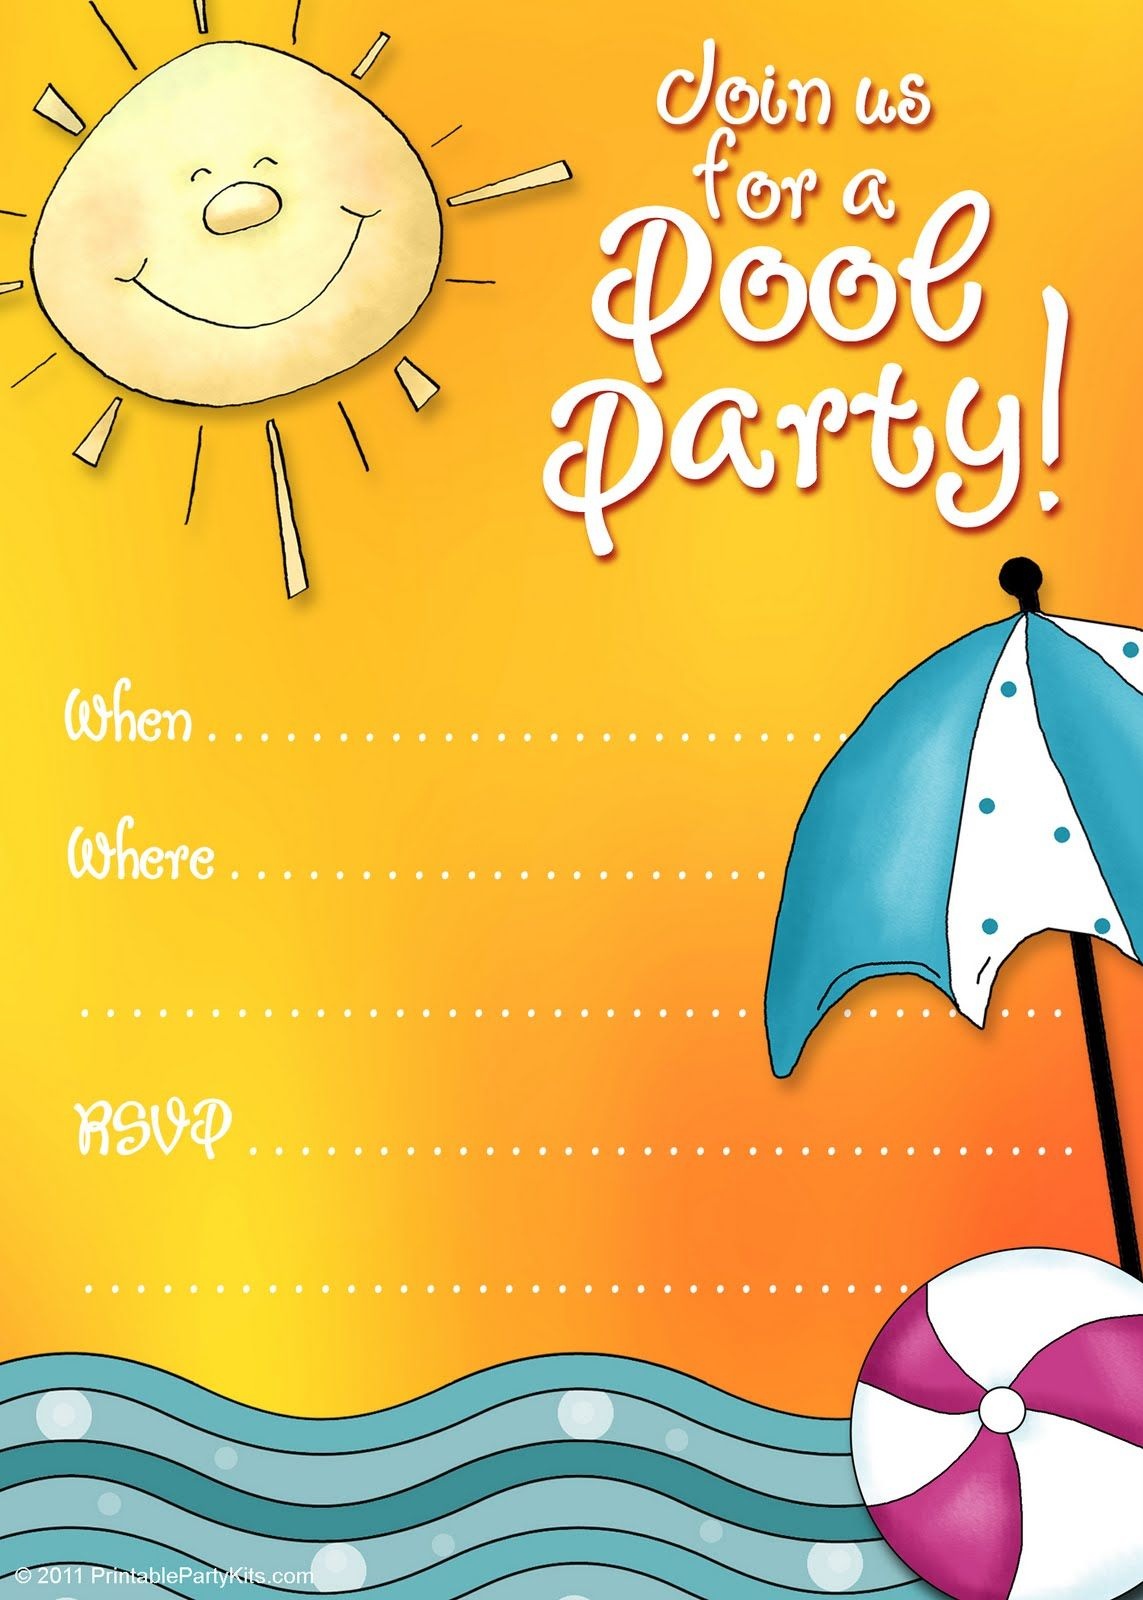 Free Printable Party Invitations: Summer Pool Party Invites | Adhd - Free Printable Pool Party Invitations